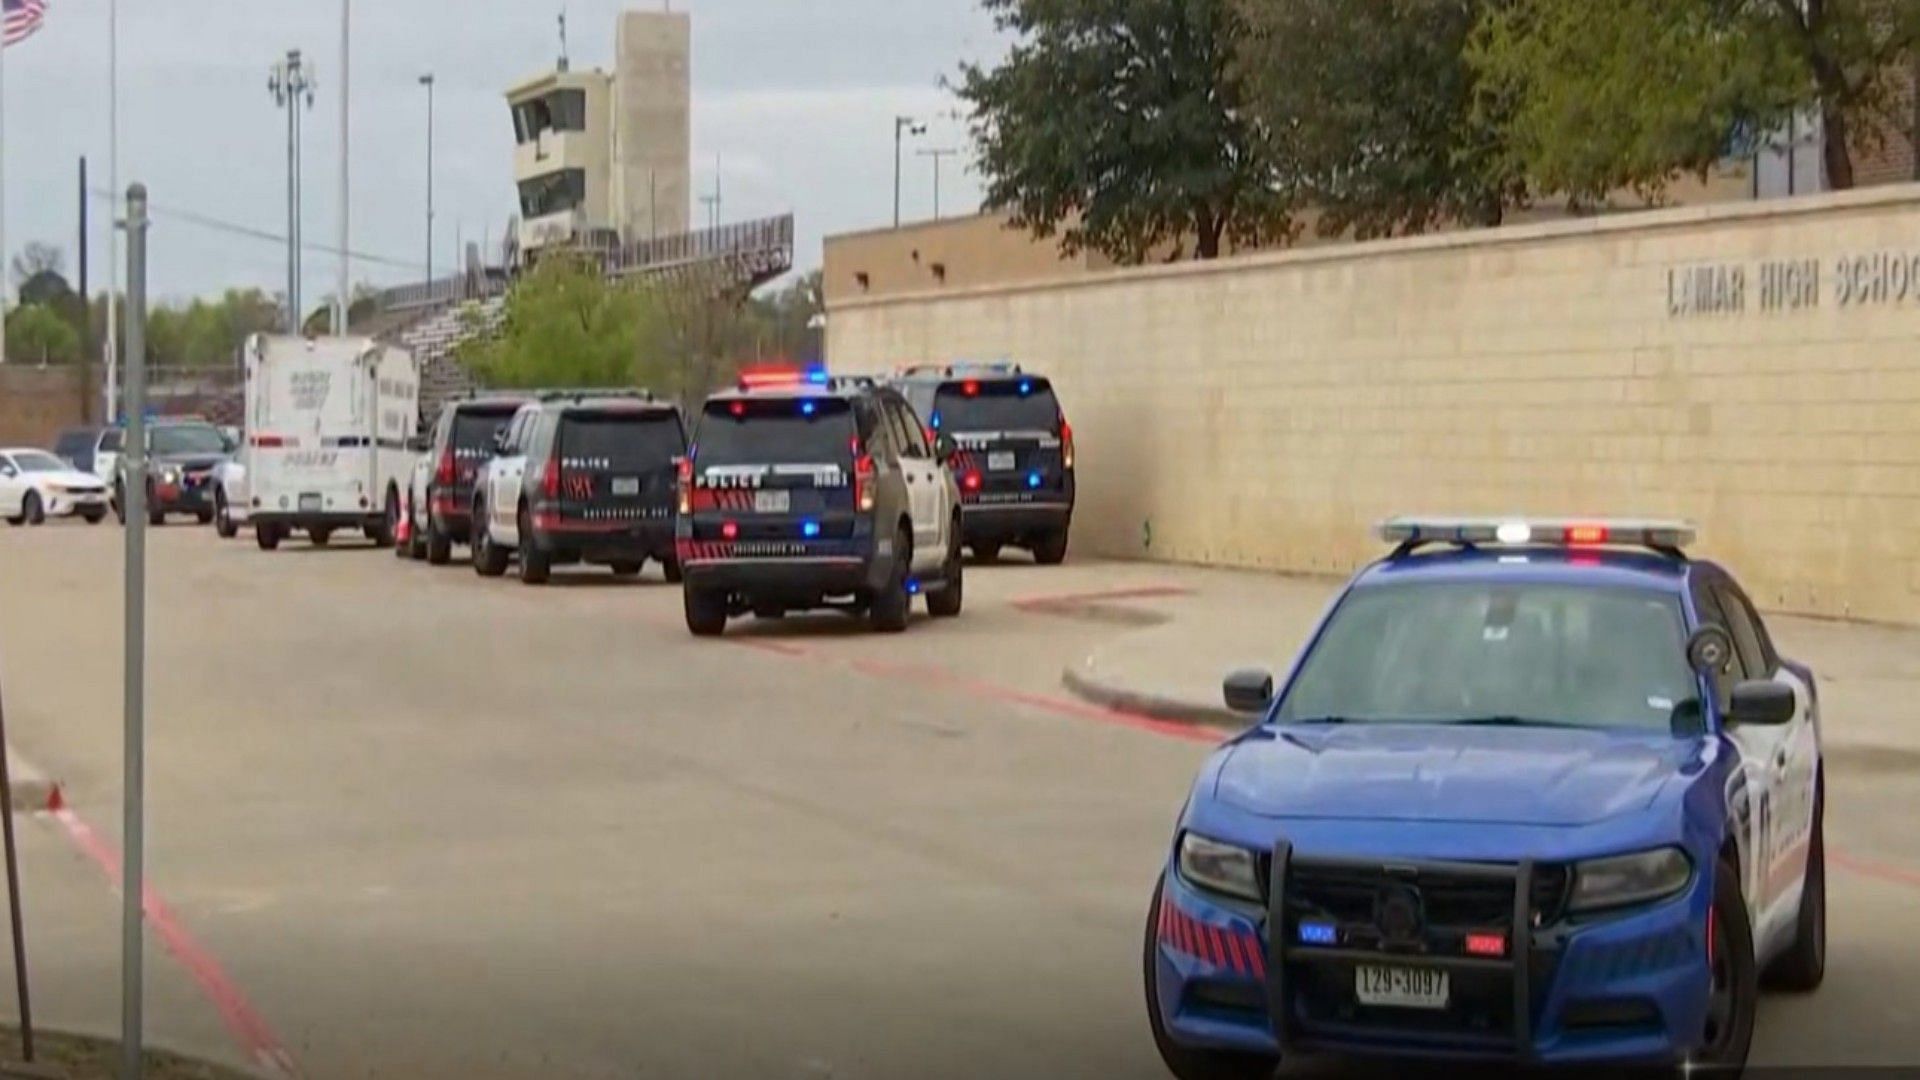 Police vehicles parked outside Lamar High School after a school shooting on Monday (Image via K-12 school shooting/Twitter)